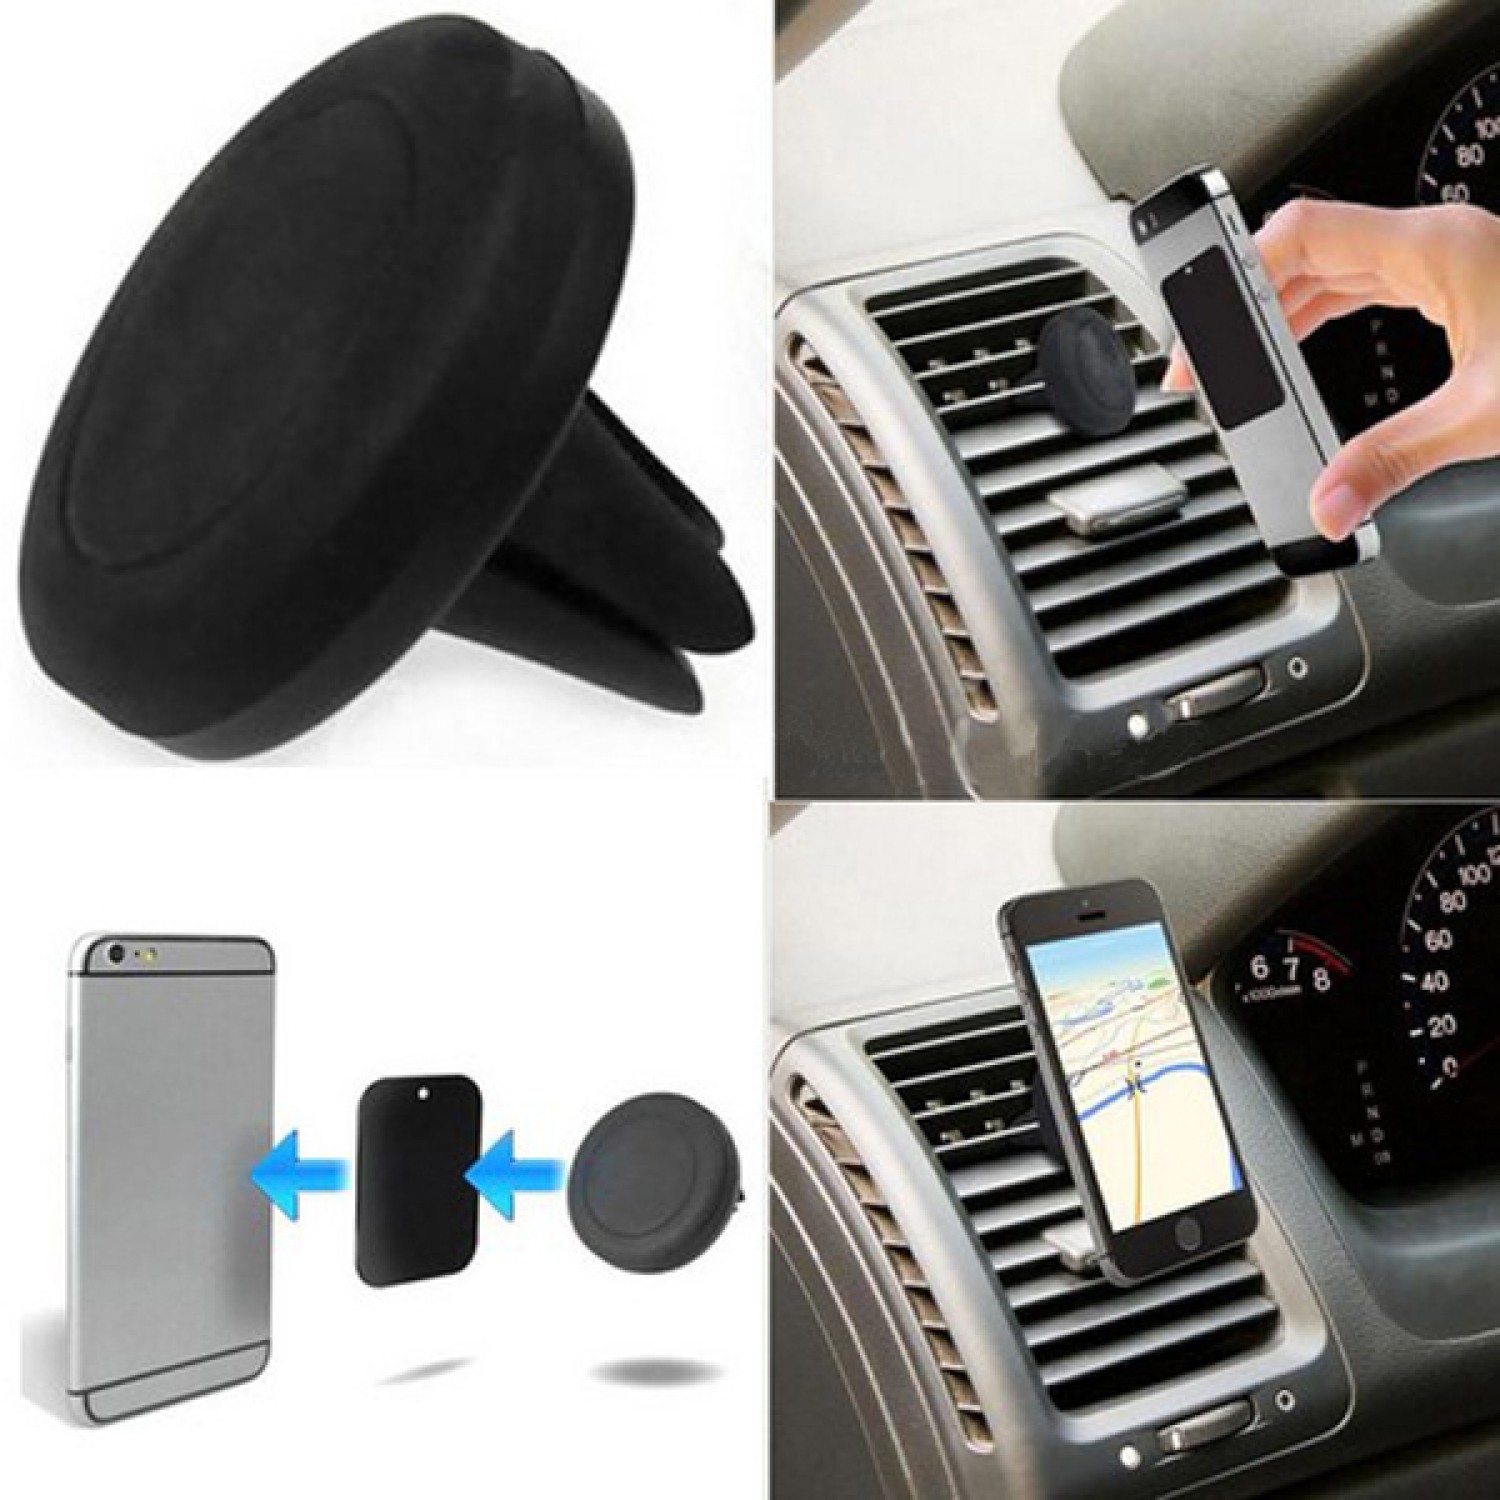 Bwen Fit for 2014-2018 Audi A6 Phone Holder for Car Mini Aluminium Sliver Air Vent Mount Holder Cradle for Smartphone 4 to 7,Fit for iPhone,Samsung Galaxy,Google,LG,Huawei,LG,Sony,Nokia 